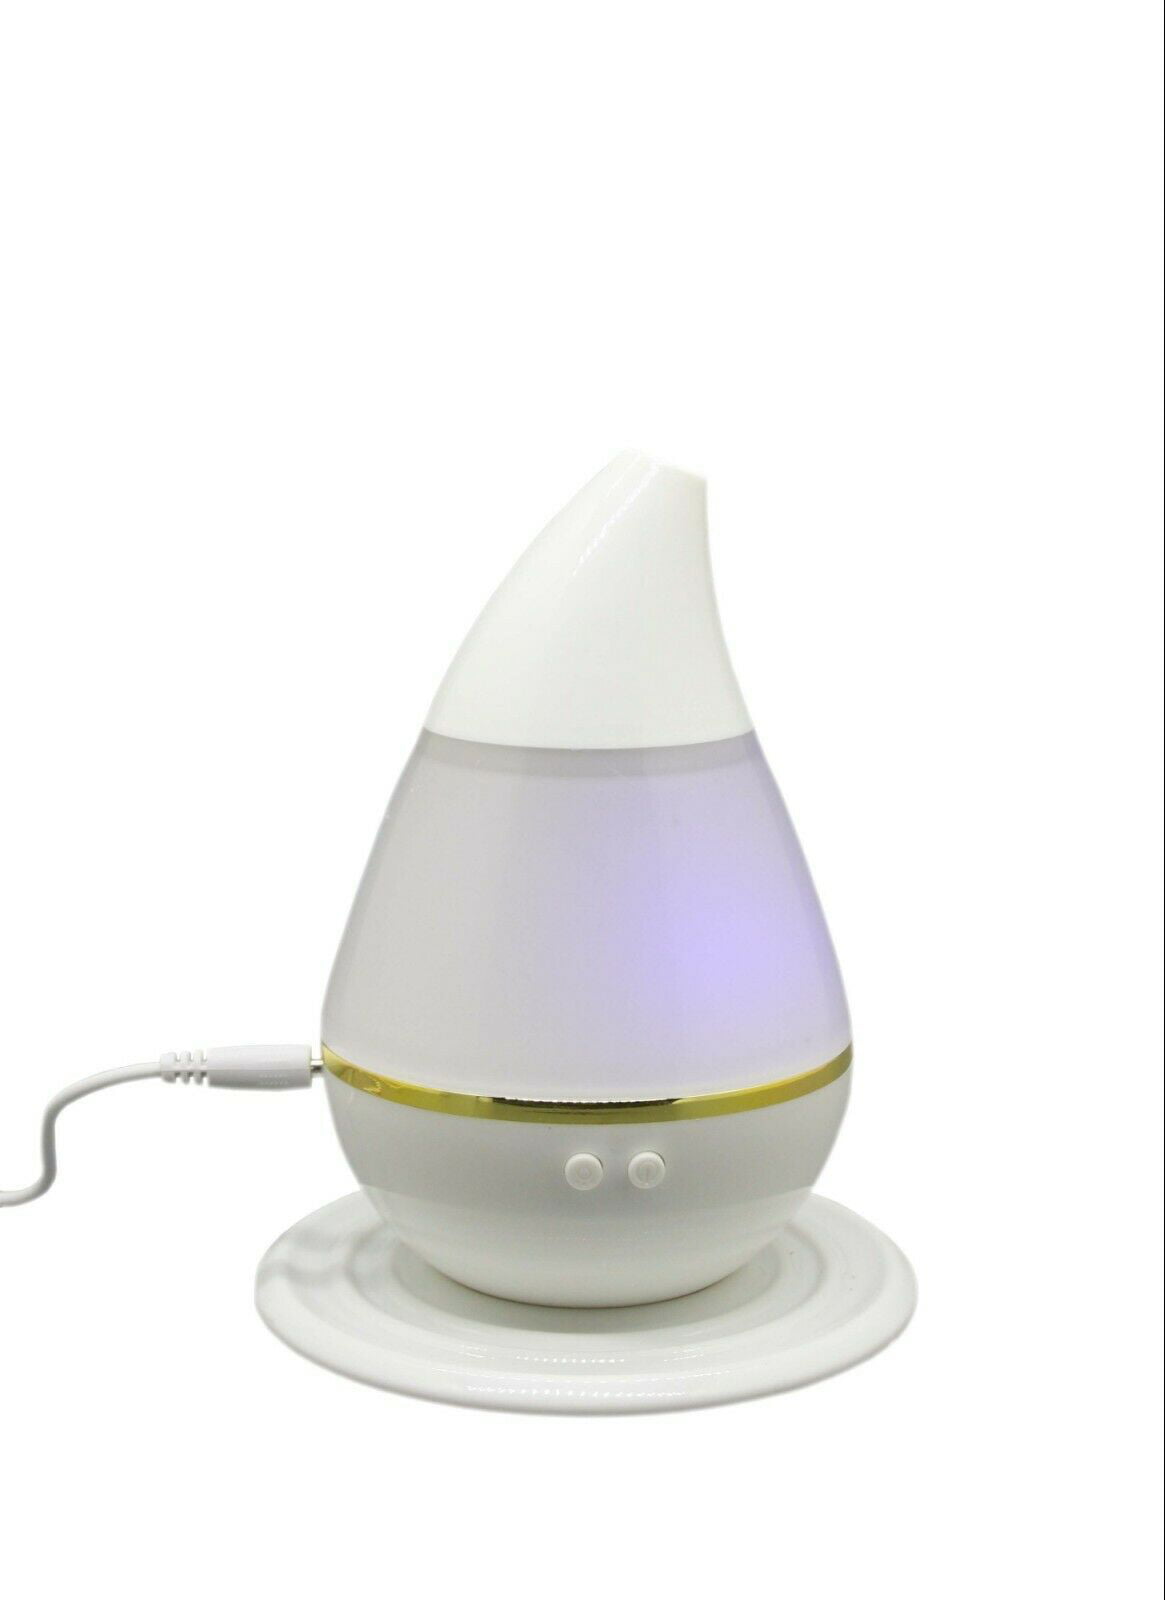 USB LED Ultrasonic Air Humidifier Essential Aroma Oil Diffuser Purifier Atomizer 